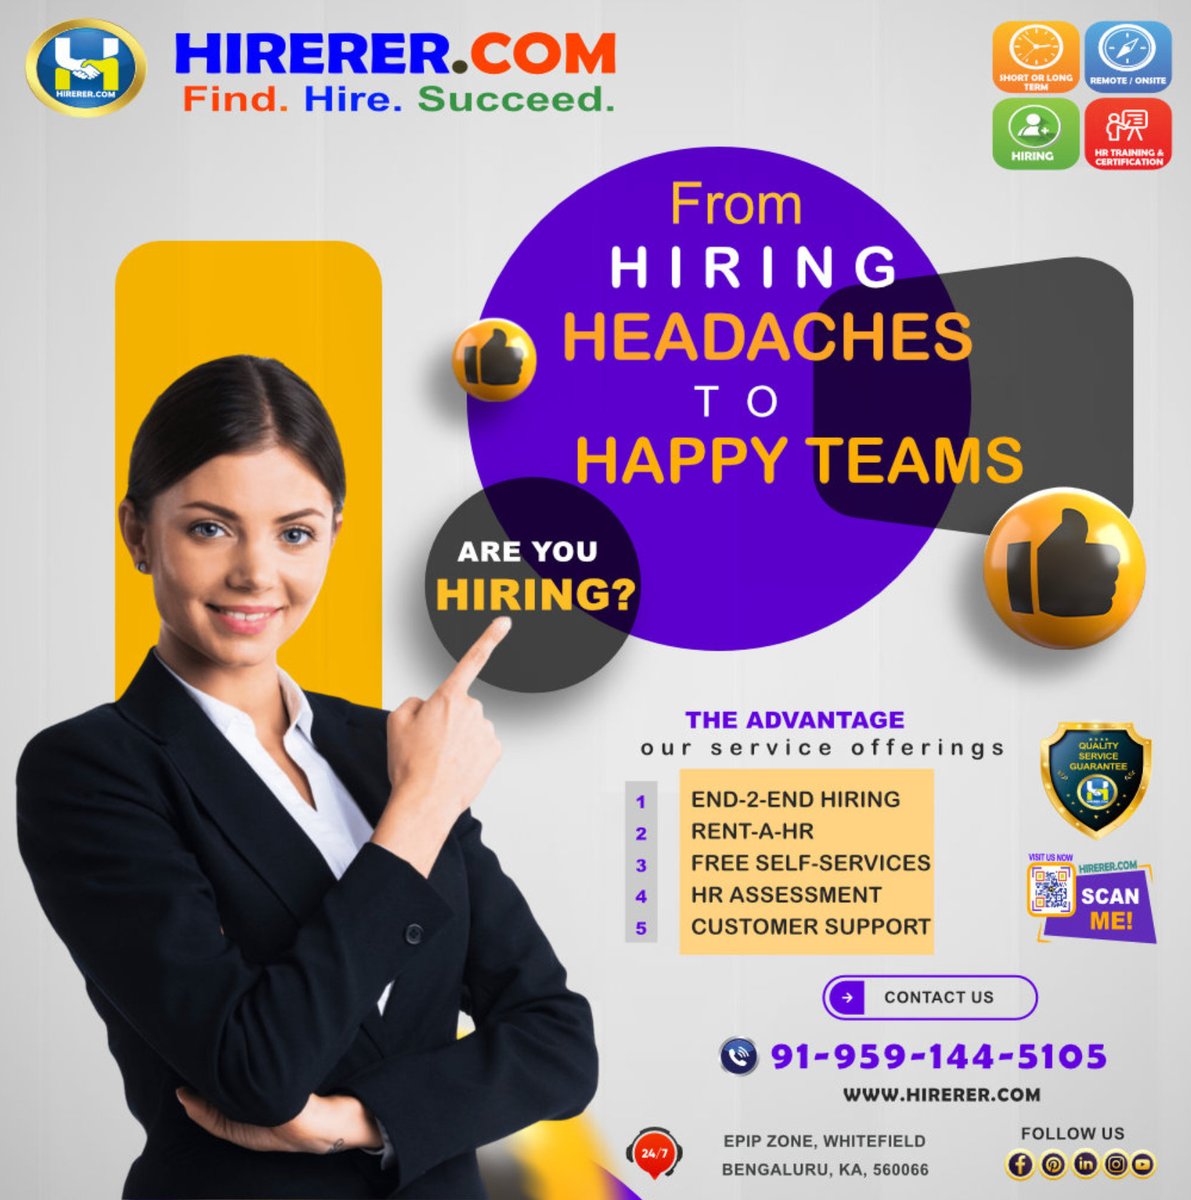 HIRERER.COM, From Hiring Headaches to Happy Teams, Your Affordable #Hiring Partner

#HRServices #HiringSolutions #Recruitment #HRConsulting #AffordableHiring #BusinessGrowth #HRPartnership #rentahr #outofjob #Hirerer #SmartlyHiring #iHRAssist #SmartlyHR